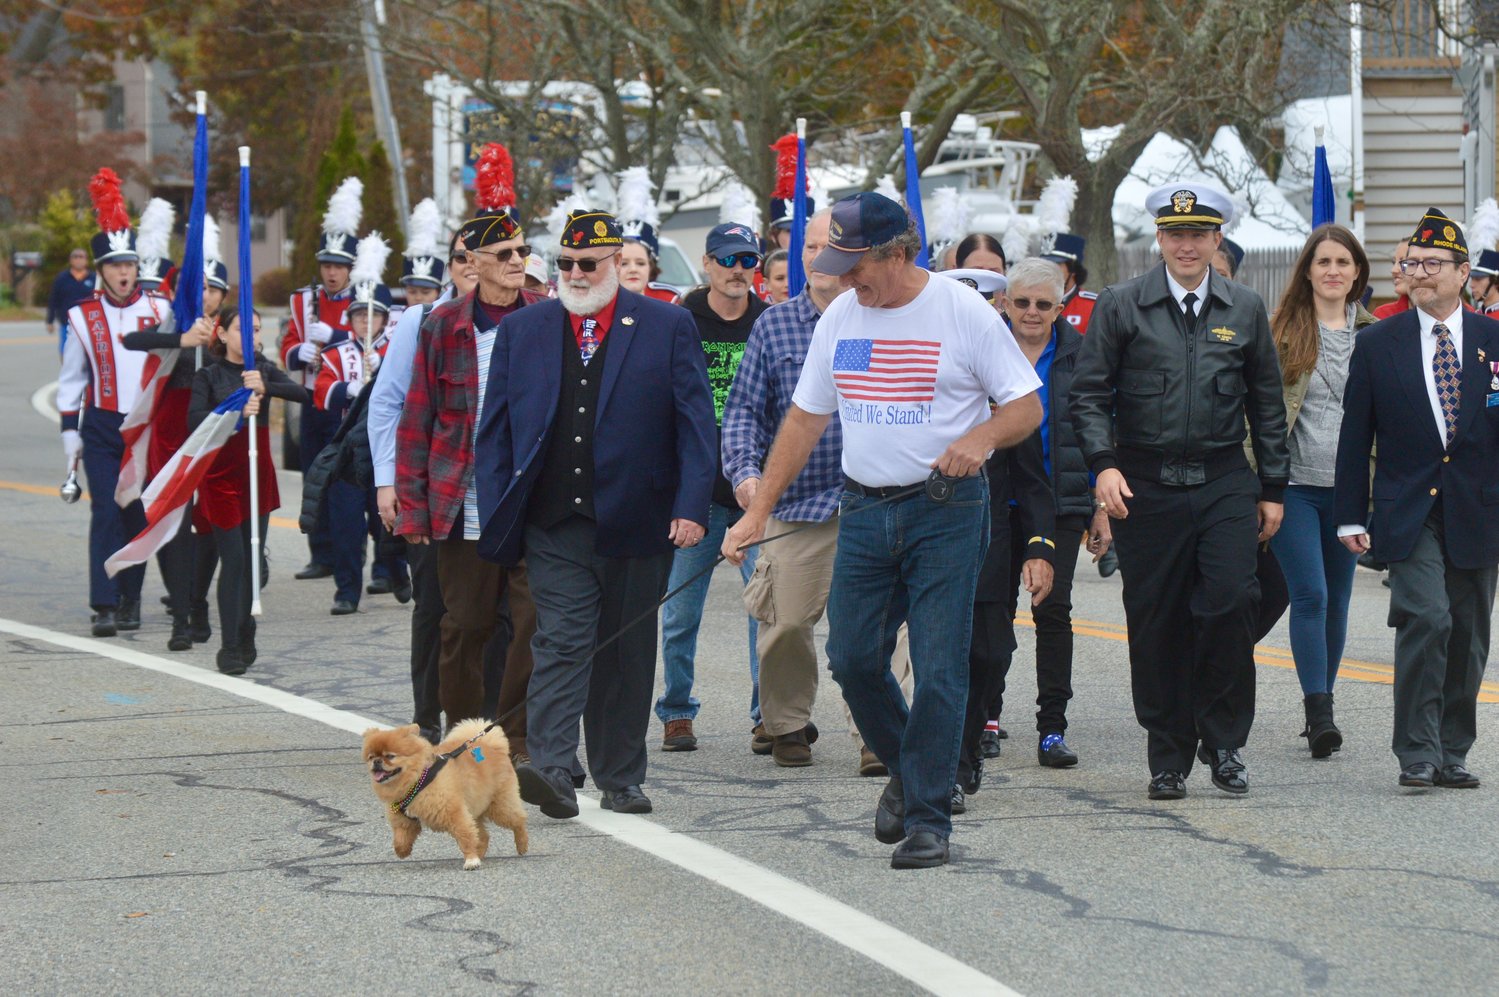 A parade from Stone Bridge leading to Thrive Coffee House was led by veterans, followed by the PHS Marching Band.